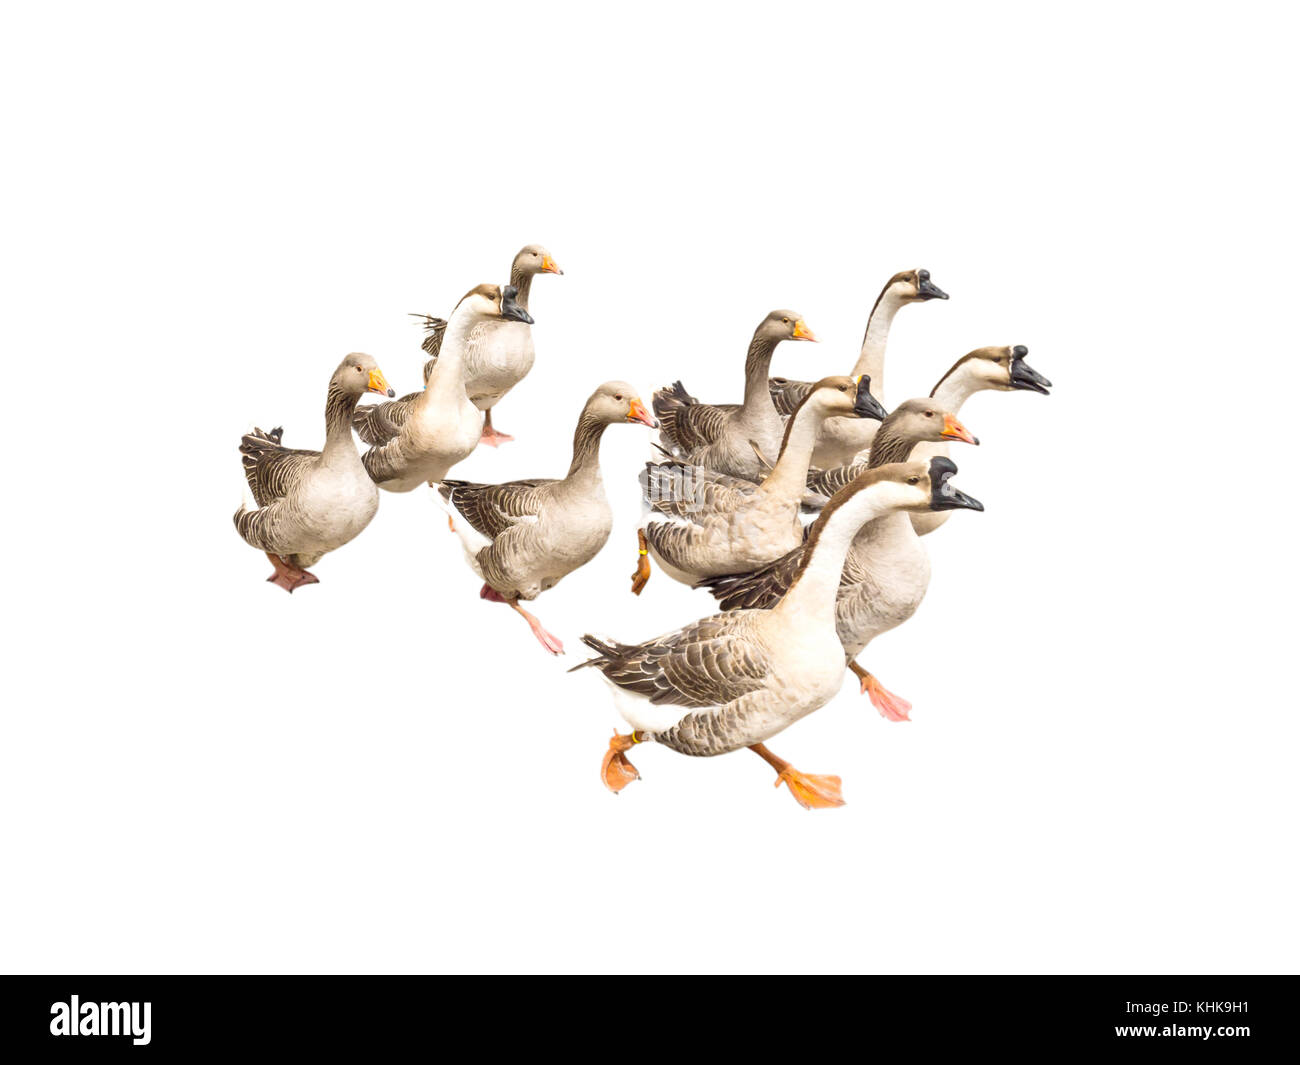 Flock of running geese isolated on white Stock Photo